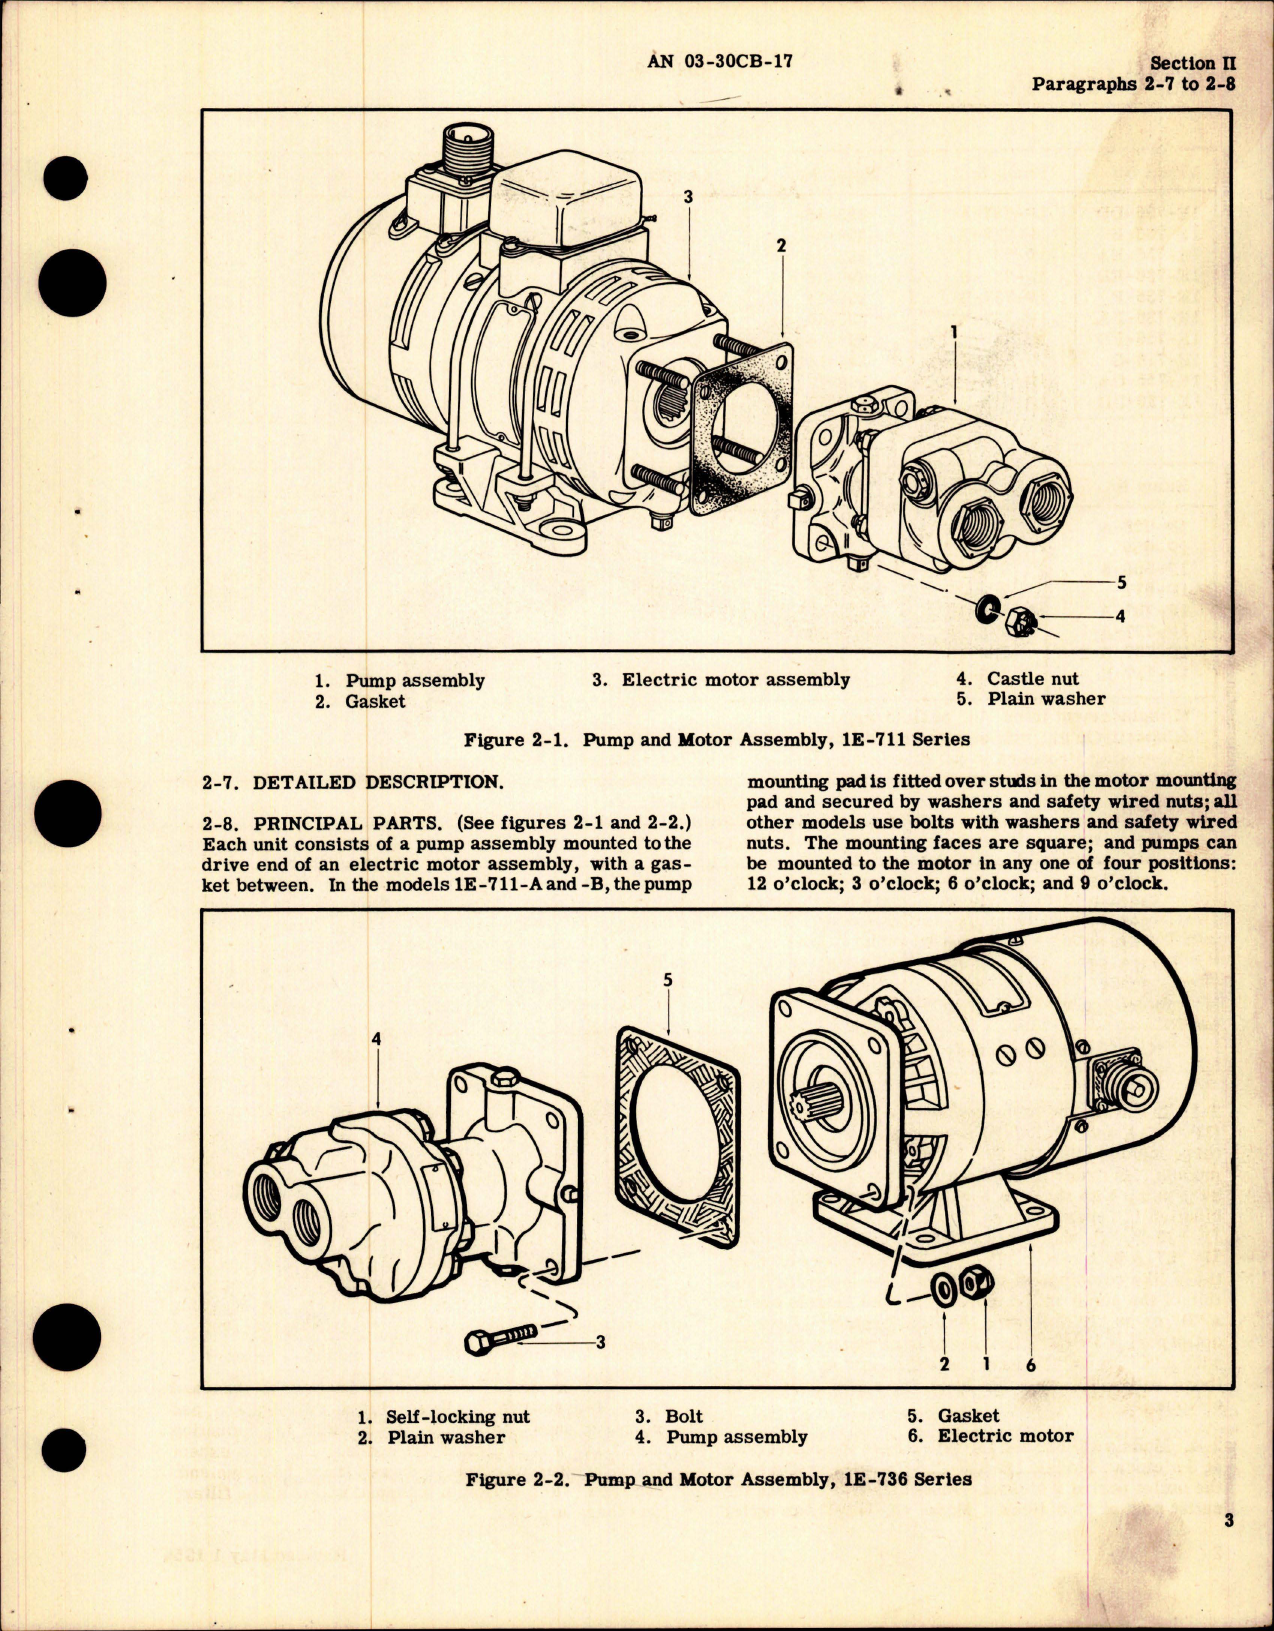 Sample page 7 from AirCorps Library document: Hydraulic Gear Pump